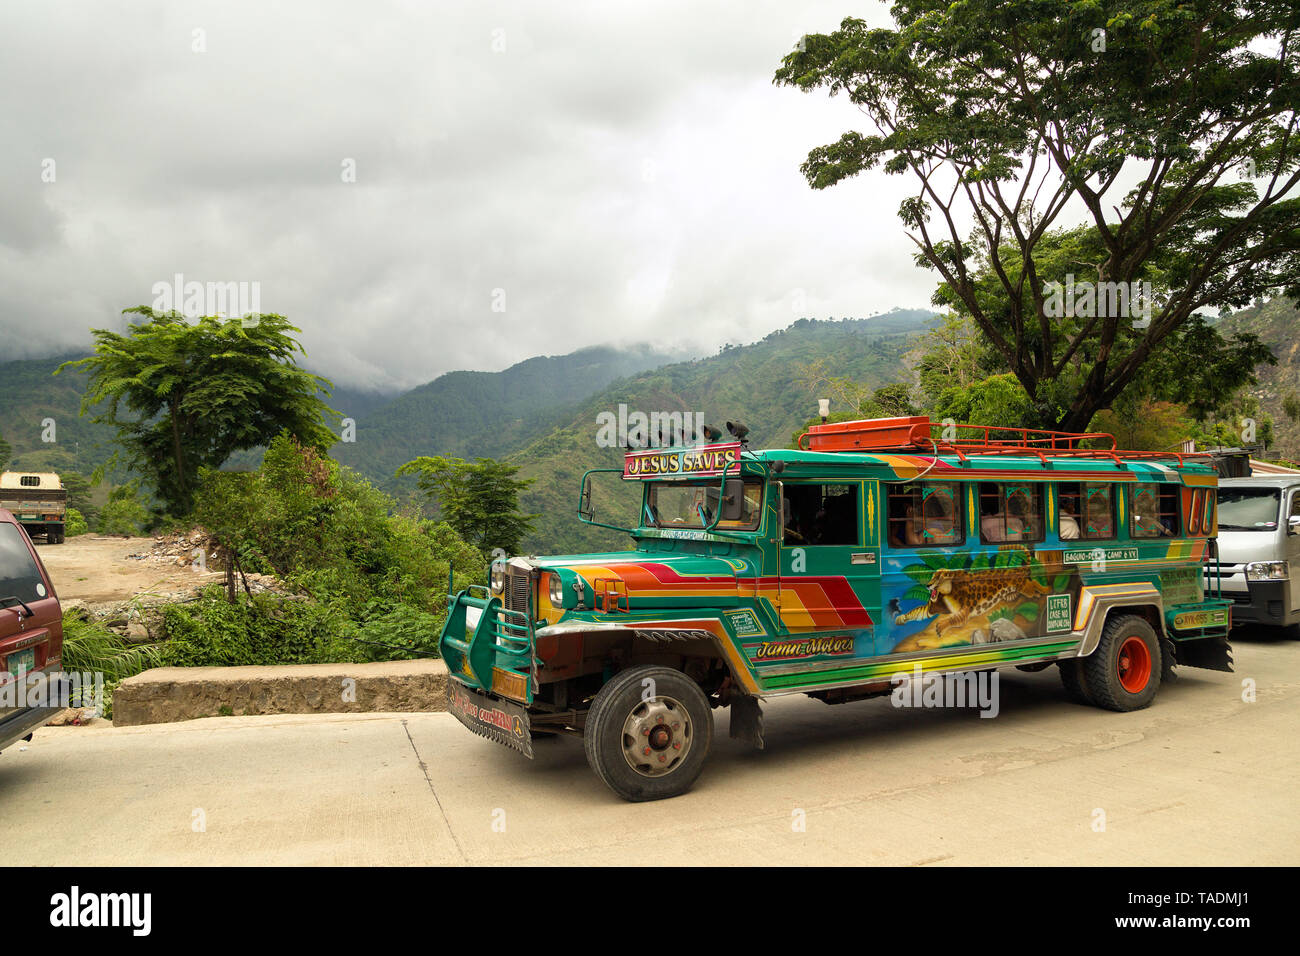 On a mountain road on a colorful jeepney Stock Photo